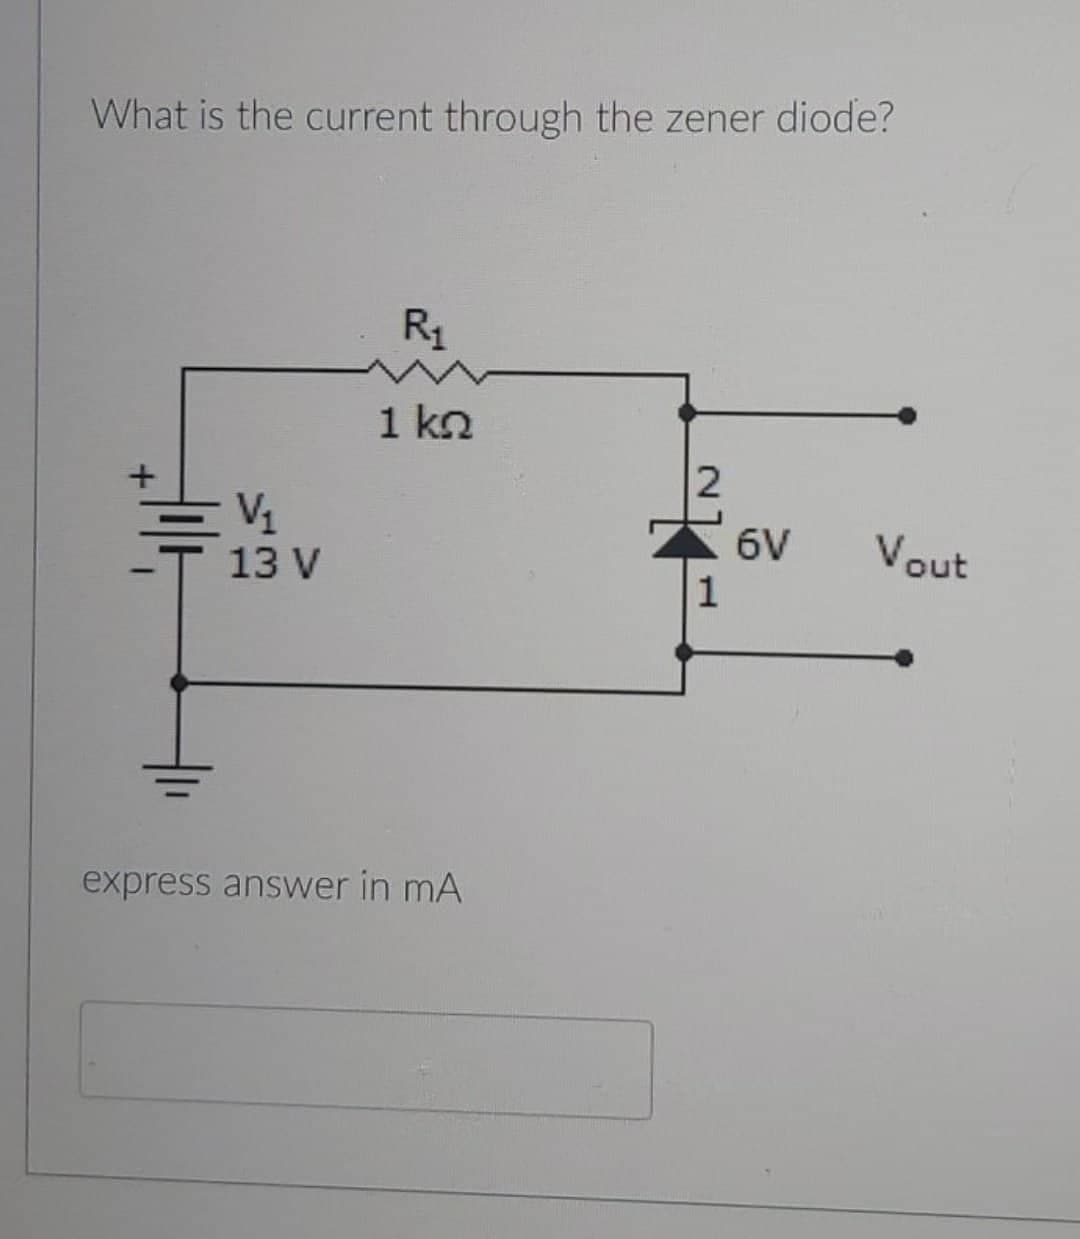 What is the current through the zener diode?
V₁
13 V
R₁
1 kn
express answer in mA
2
1
6V
Vout